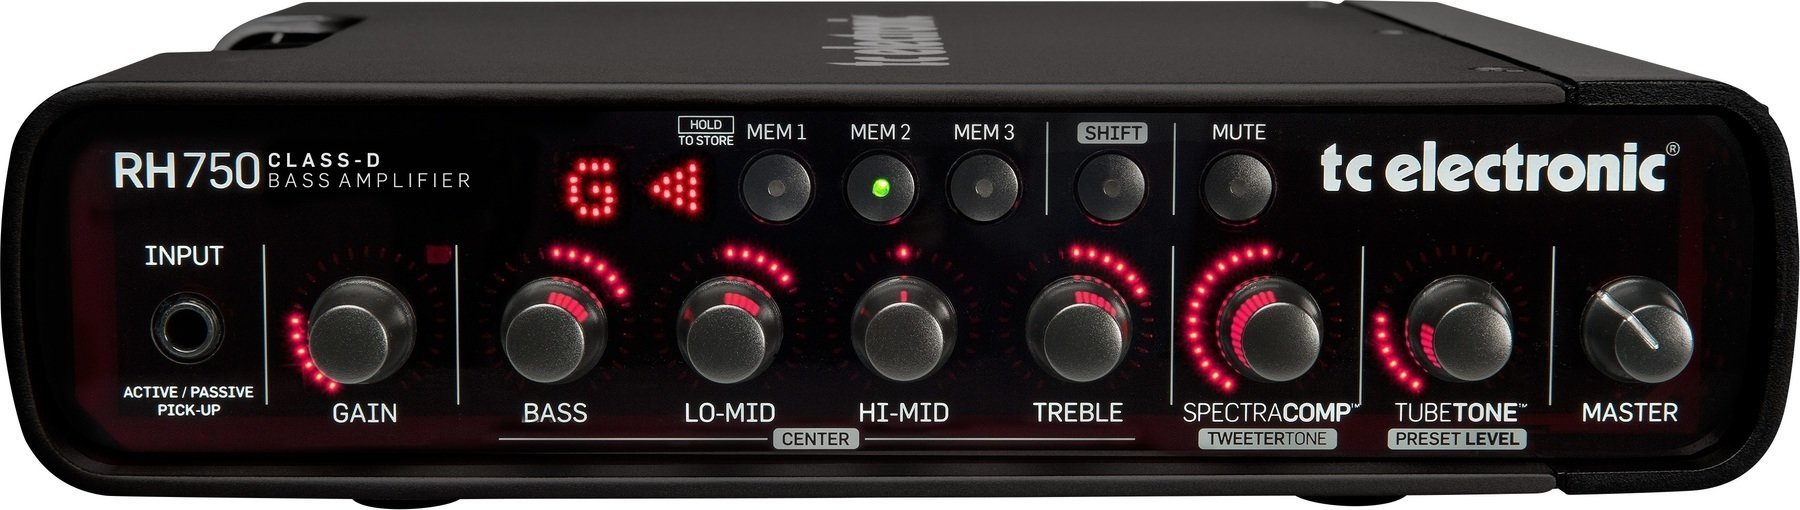 Solid-State Bass Amplifier TC Electronic RH750